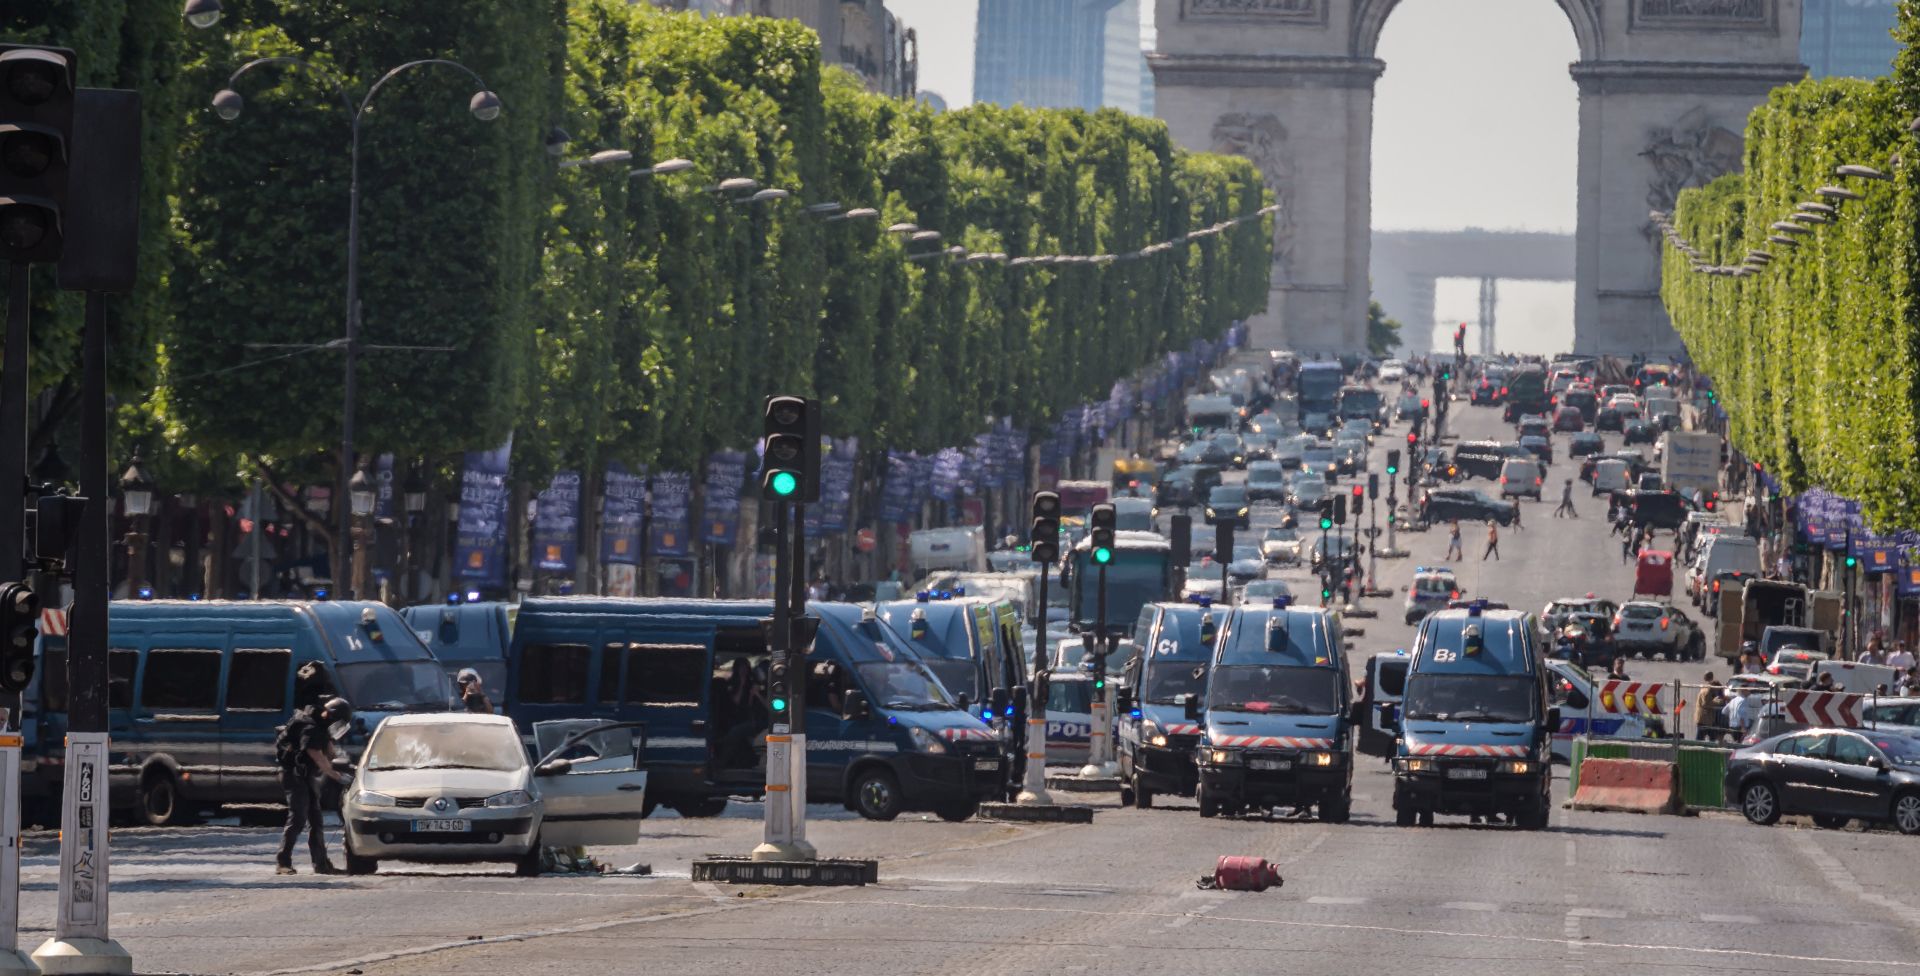 epa06037441 A police operation is under way on the Champs Elysees avenue after a car collided a with a police vehicle in Paris, France, 19 June 2017. According to latest reports, the driver allegedly drove to the police vehicle intentionally.  EPA/CHRISTOPHE PETIT TESSON